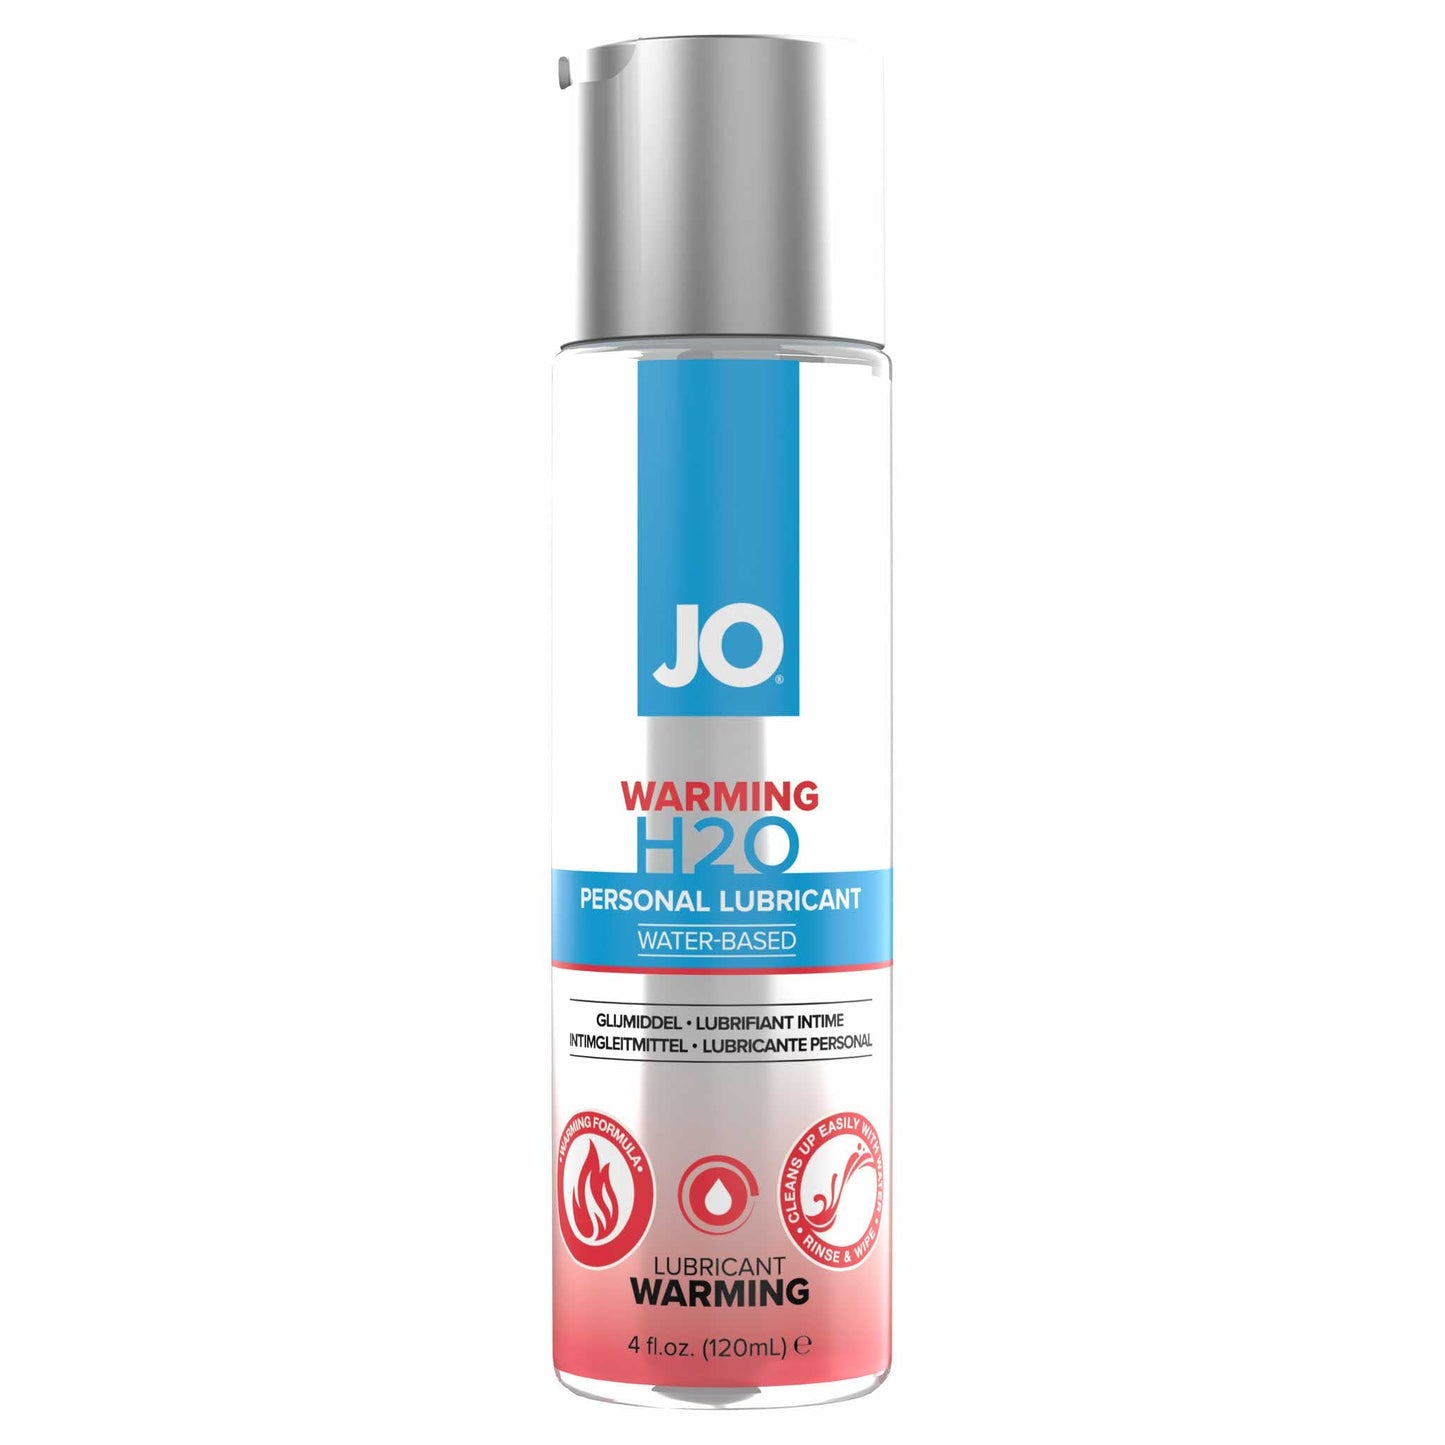 front view of the jo h2o classic personal water-based lubricant warming 4oz